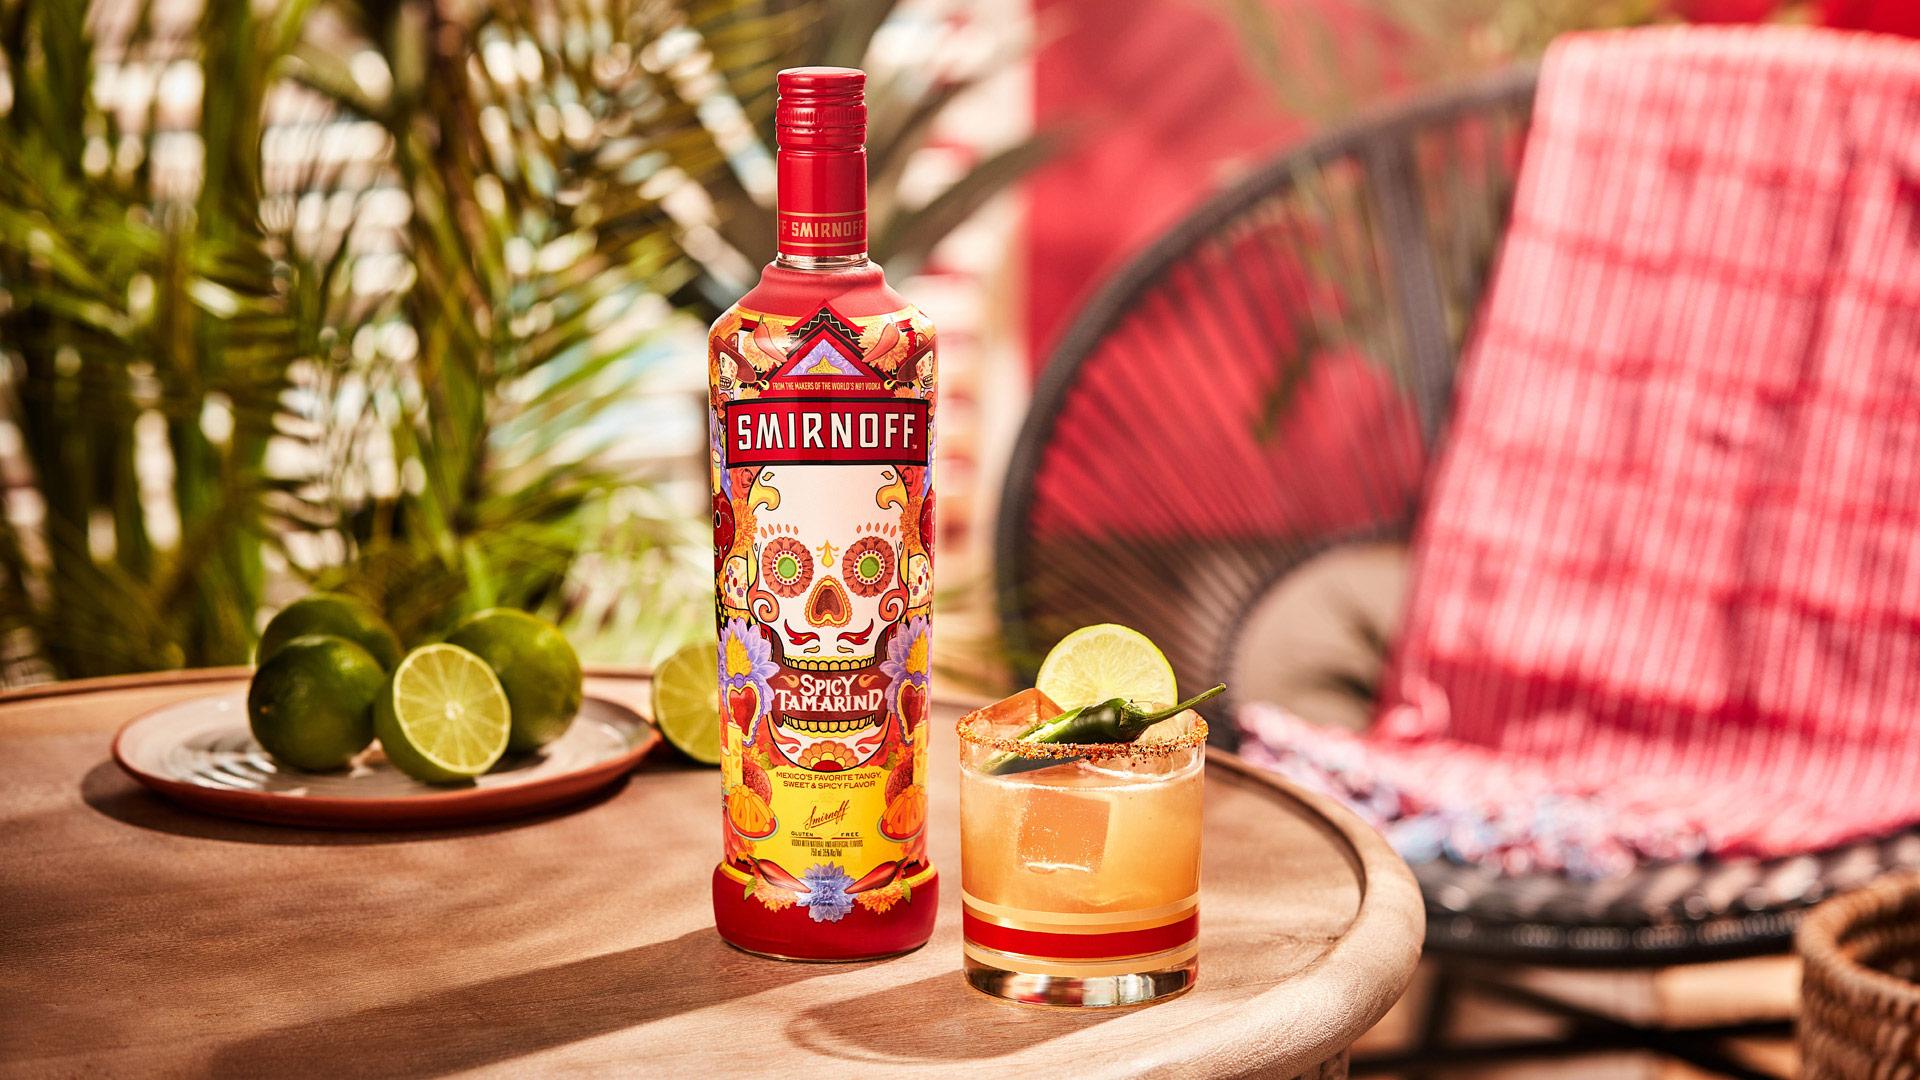 Smirnoff Spicy Tamarind vodka bottle alongside a Spicy Tama-rita cocktail, our take on the classic margarita  with a spicy seasoning rim,  lime wheel and jalepeno for garnish. 